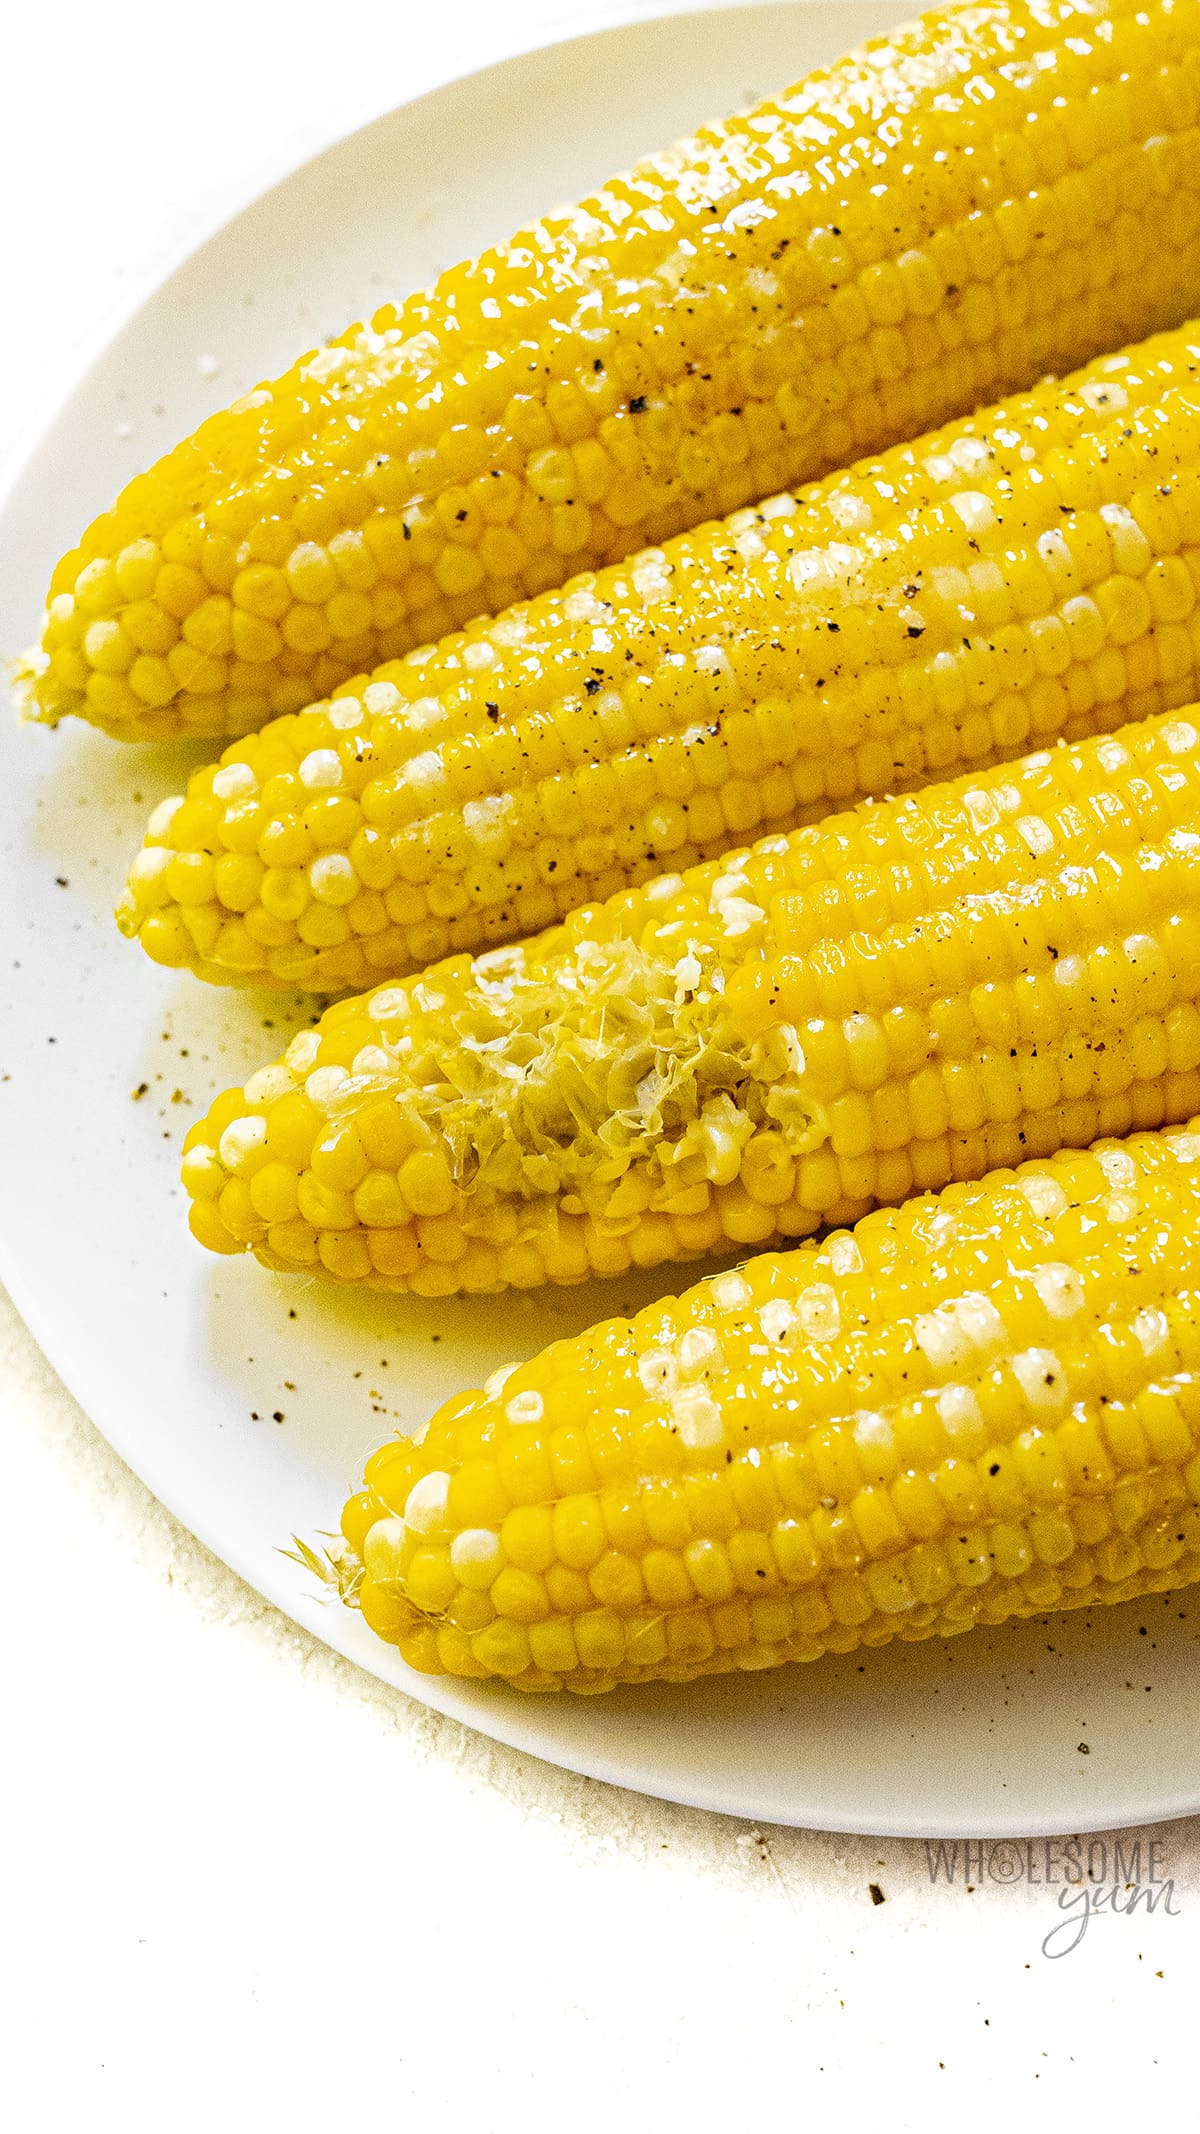 Corn on a plate with a bite taken out of one cob.